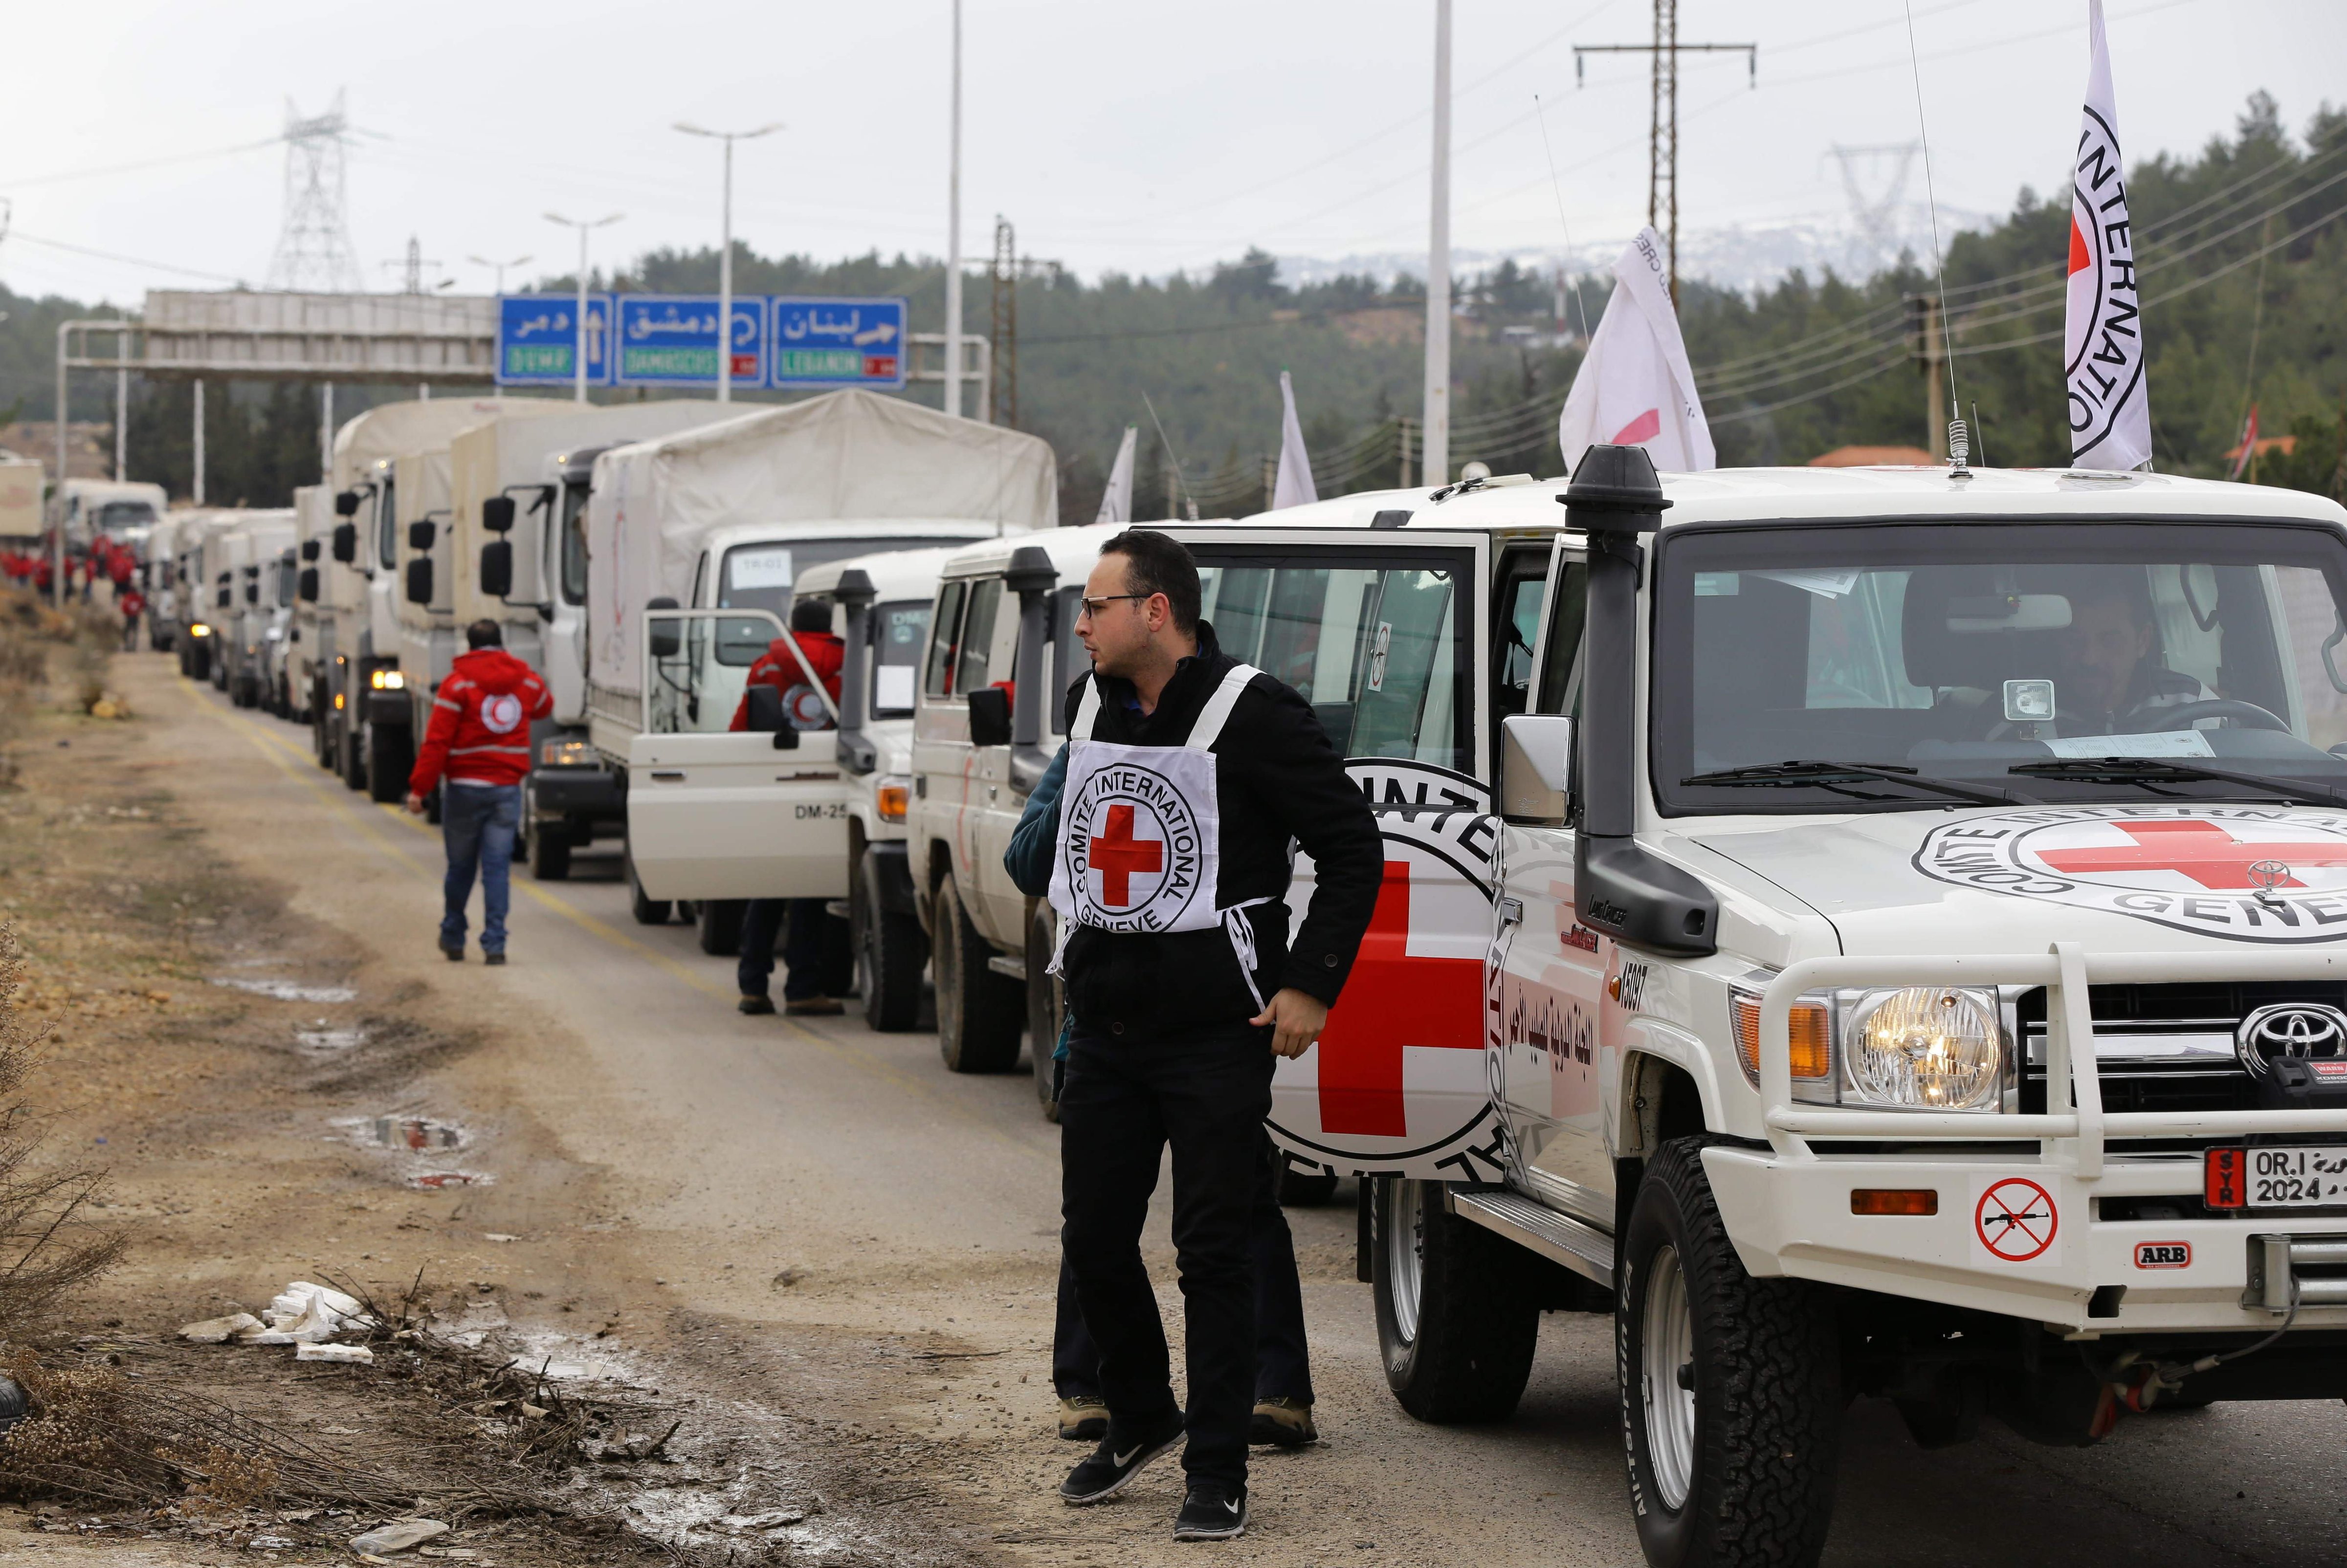 A convoy of aid from the International Committee of the Red Cross (ICRC) waits on the outskirts of the besieged rebel-held Syrian town of Madaya, on Jan. 11, 2016. (Louai Beshara—AFP/Getty Images)